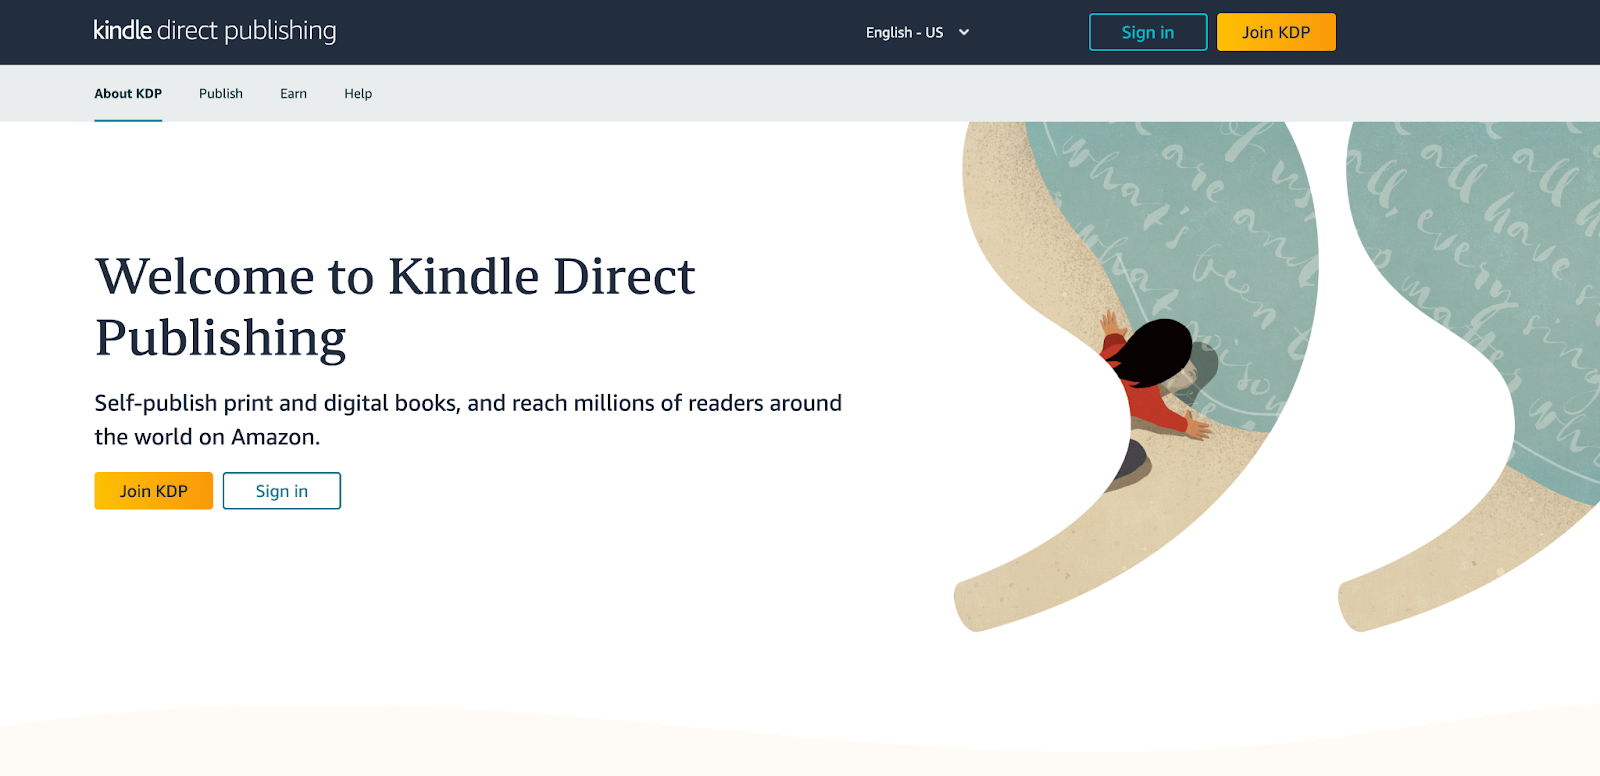 The Kindle Direct publishing homepage. Self-publishing a book can be a lucrative side business idea.